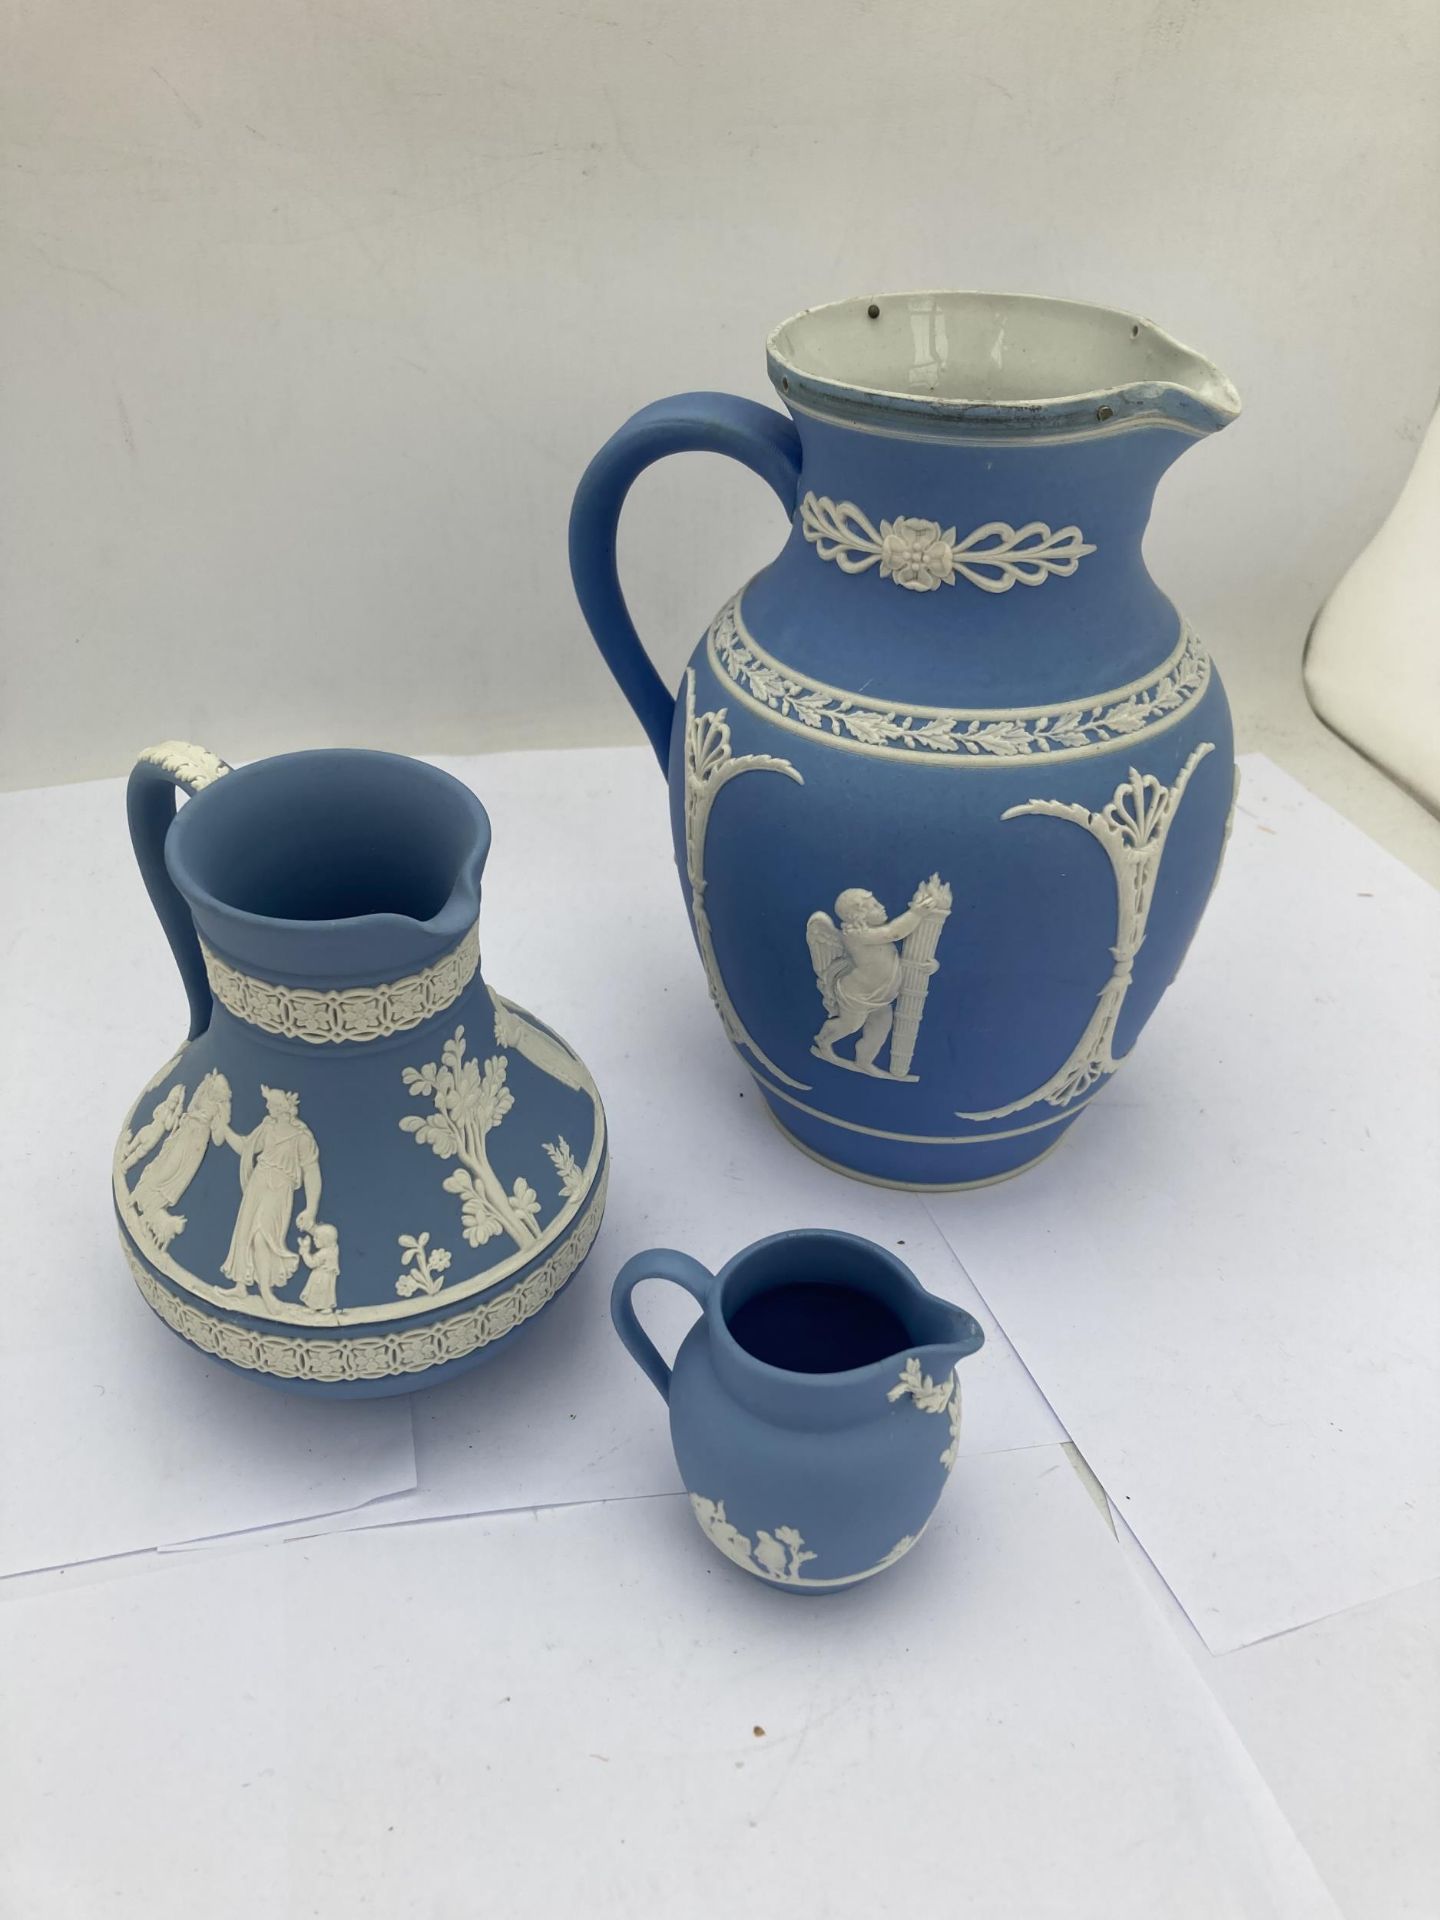 A GROUP OF THREE JASPERWARE ITEMS - TWO WEDGWOOD JUGS AND FURTHER JUG